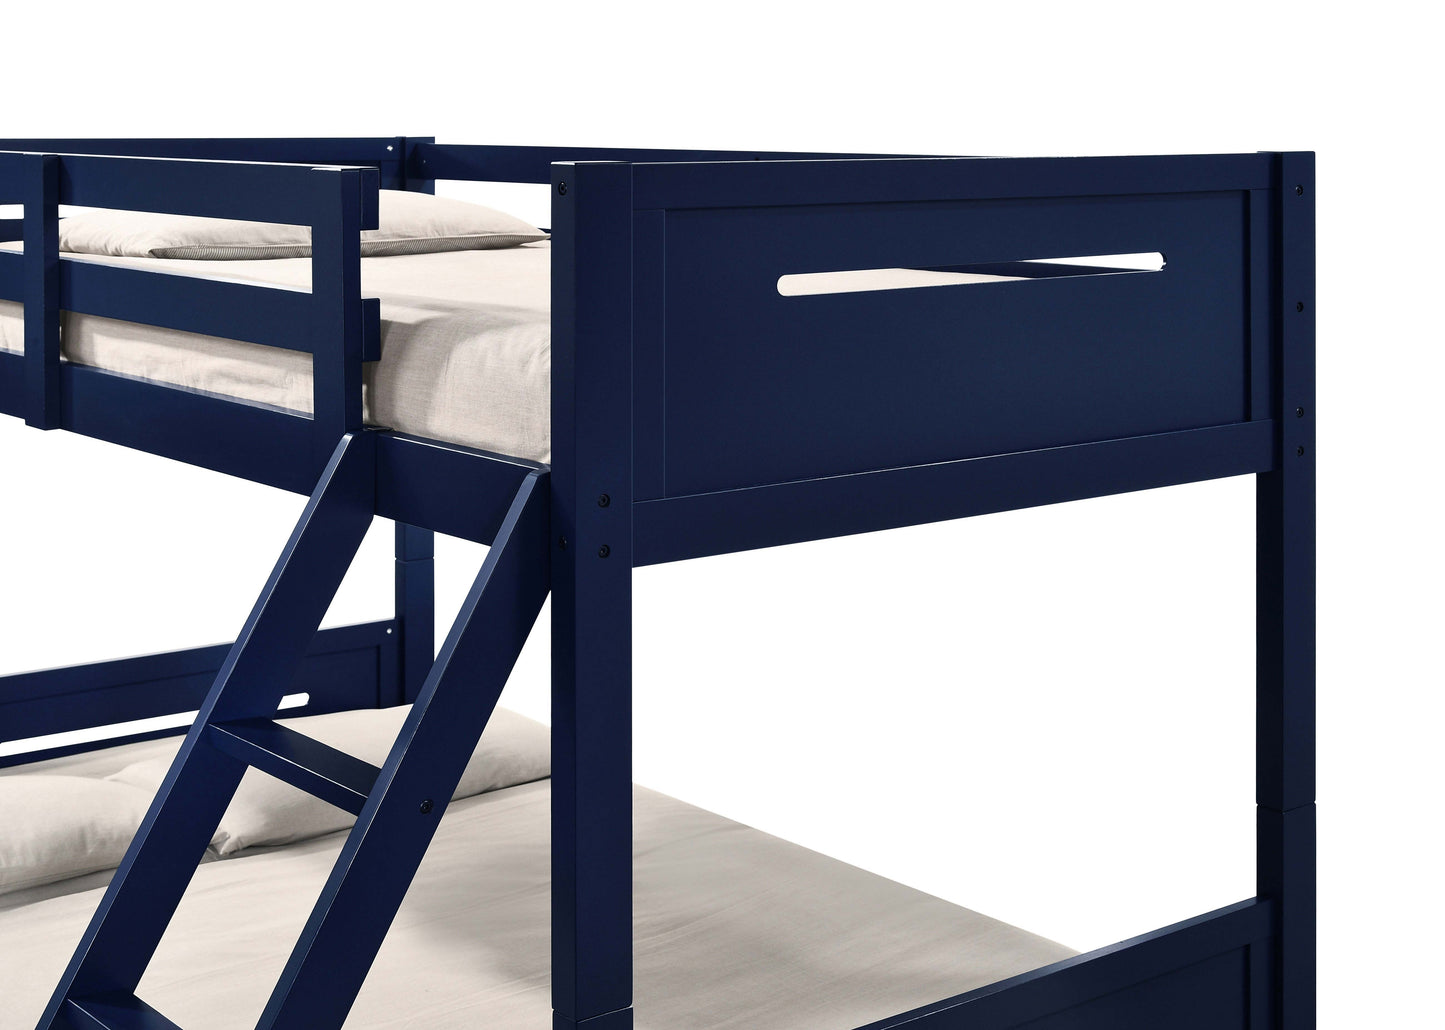 Littleton Wood Twin Over Full Bunk Bed Blue